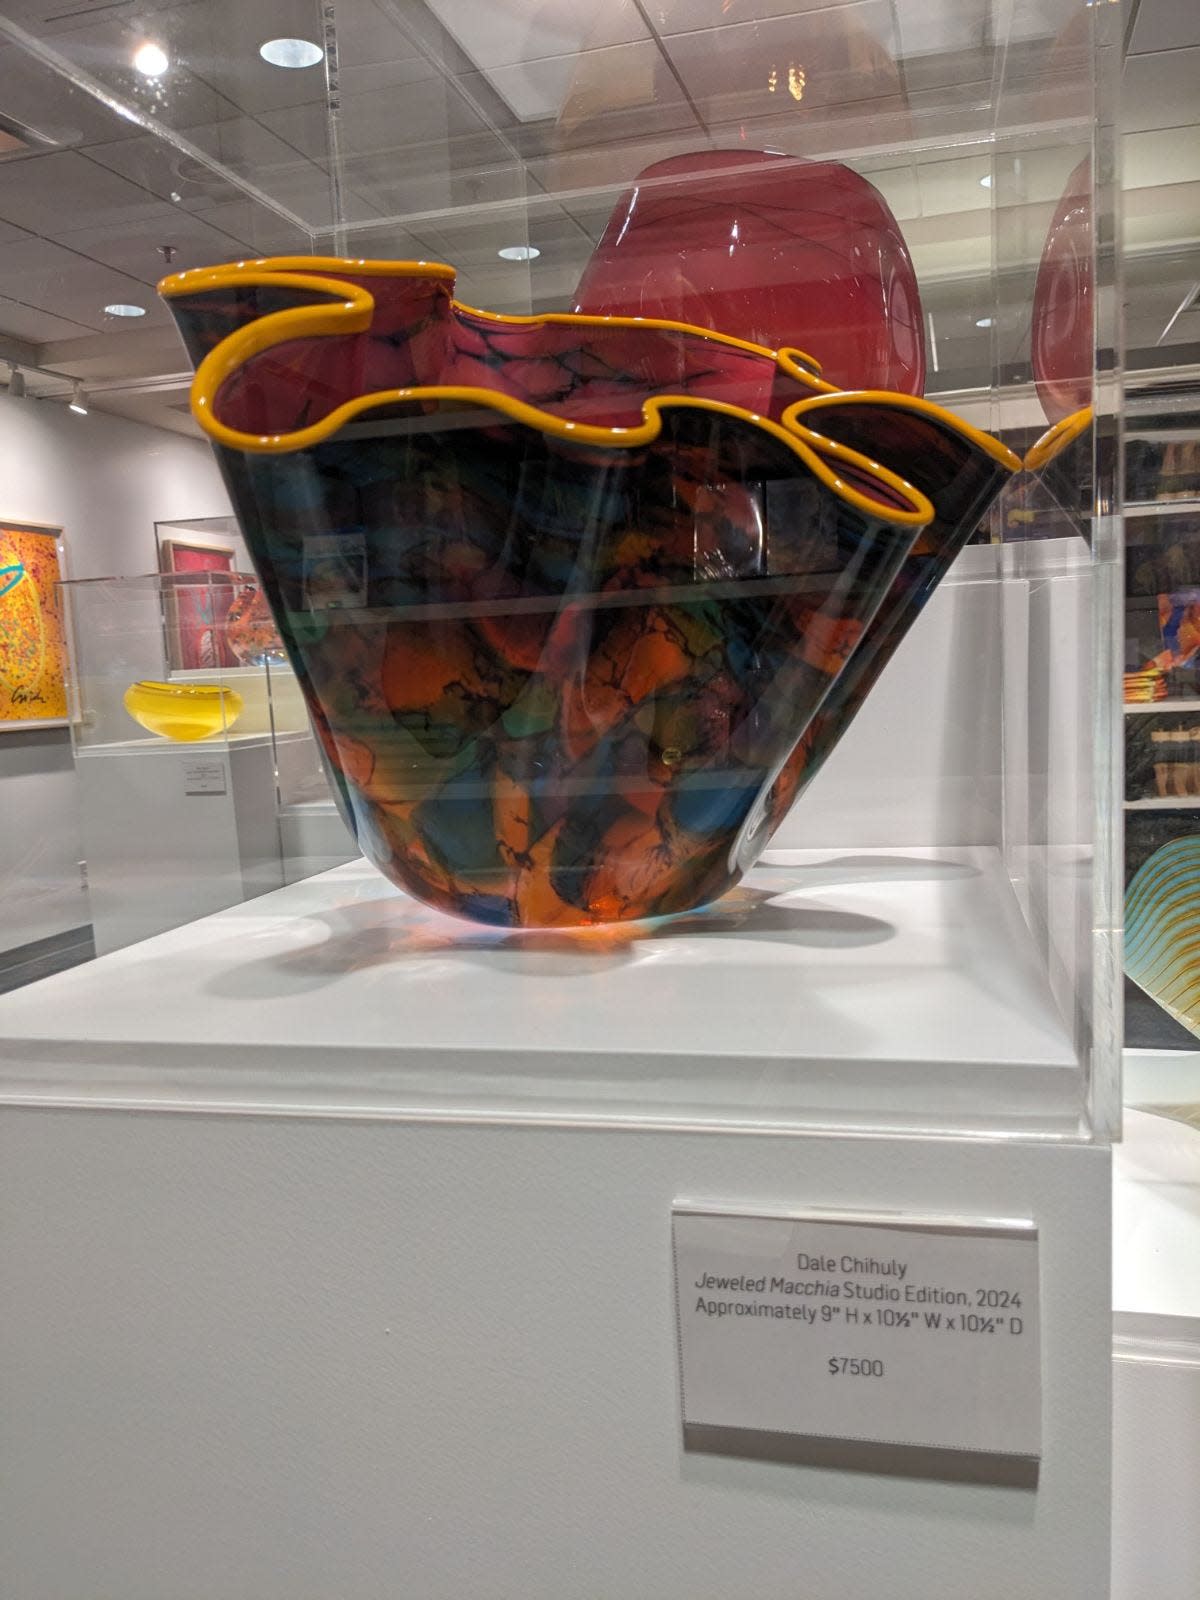 Dale Chihuly and Chihuly Studio pieces are available for sale in the "Chihuly at Biltmore" gift shop at Biltmore Estate.